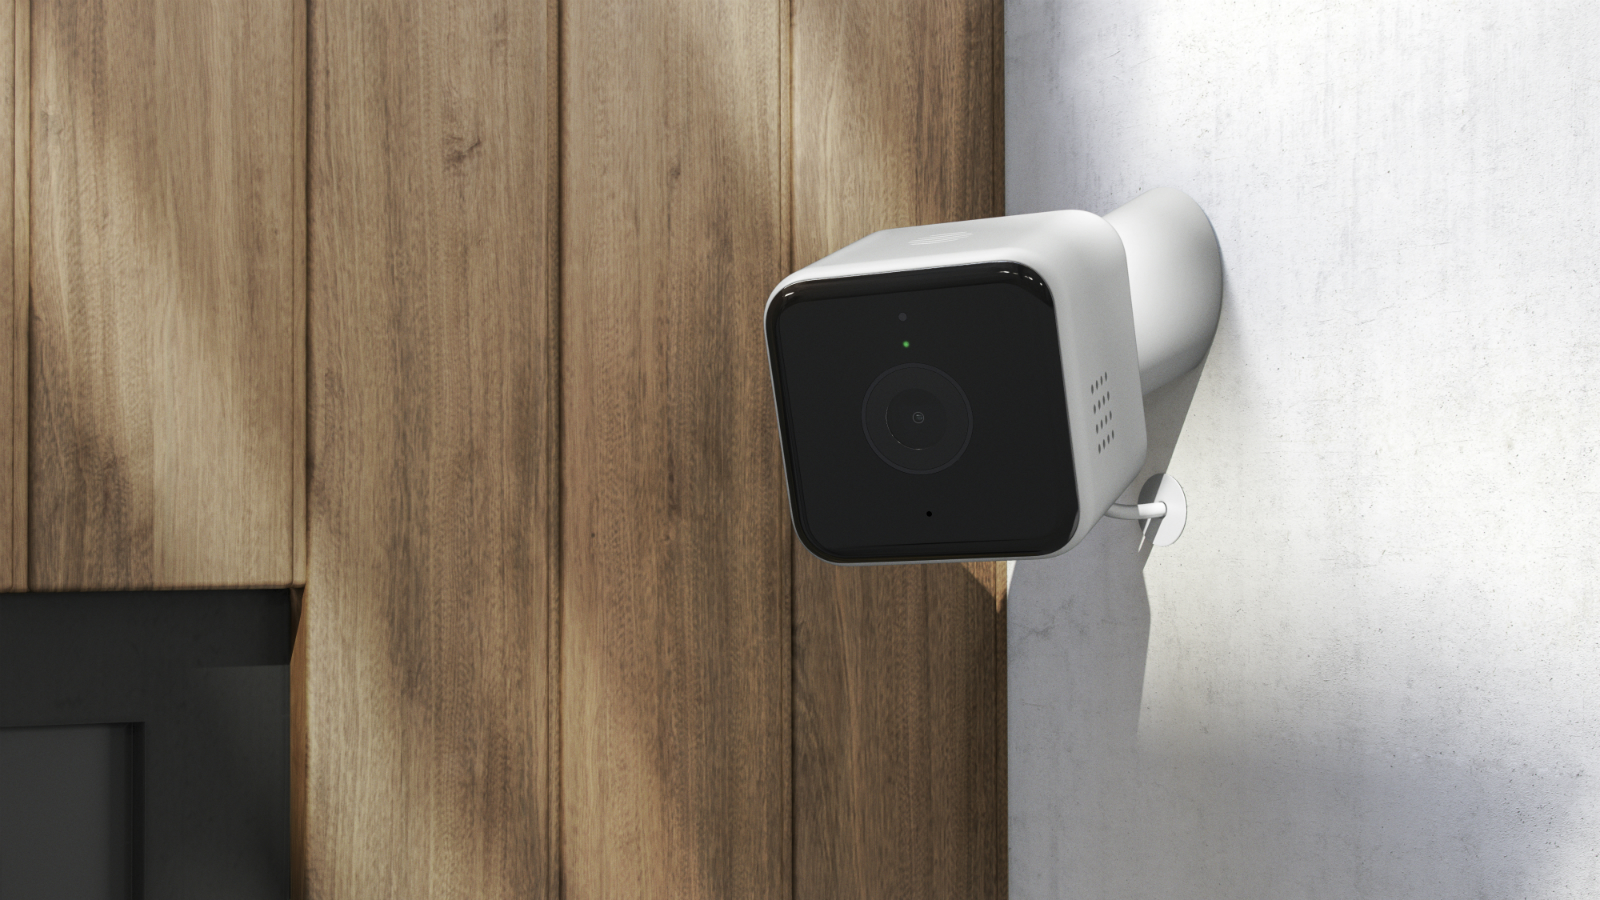 hive view outdoor smart security camera render  left angle insitu on white wall wood panelling copy